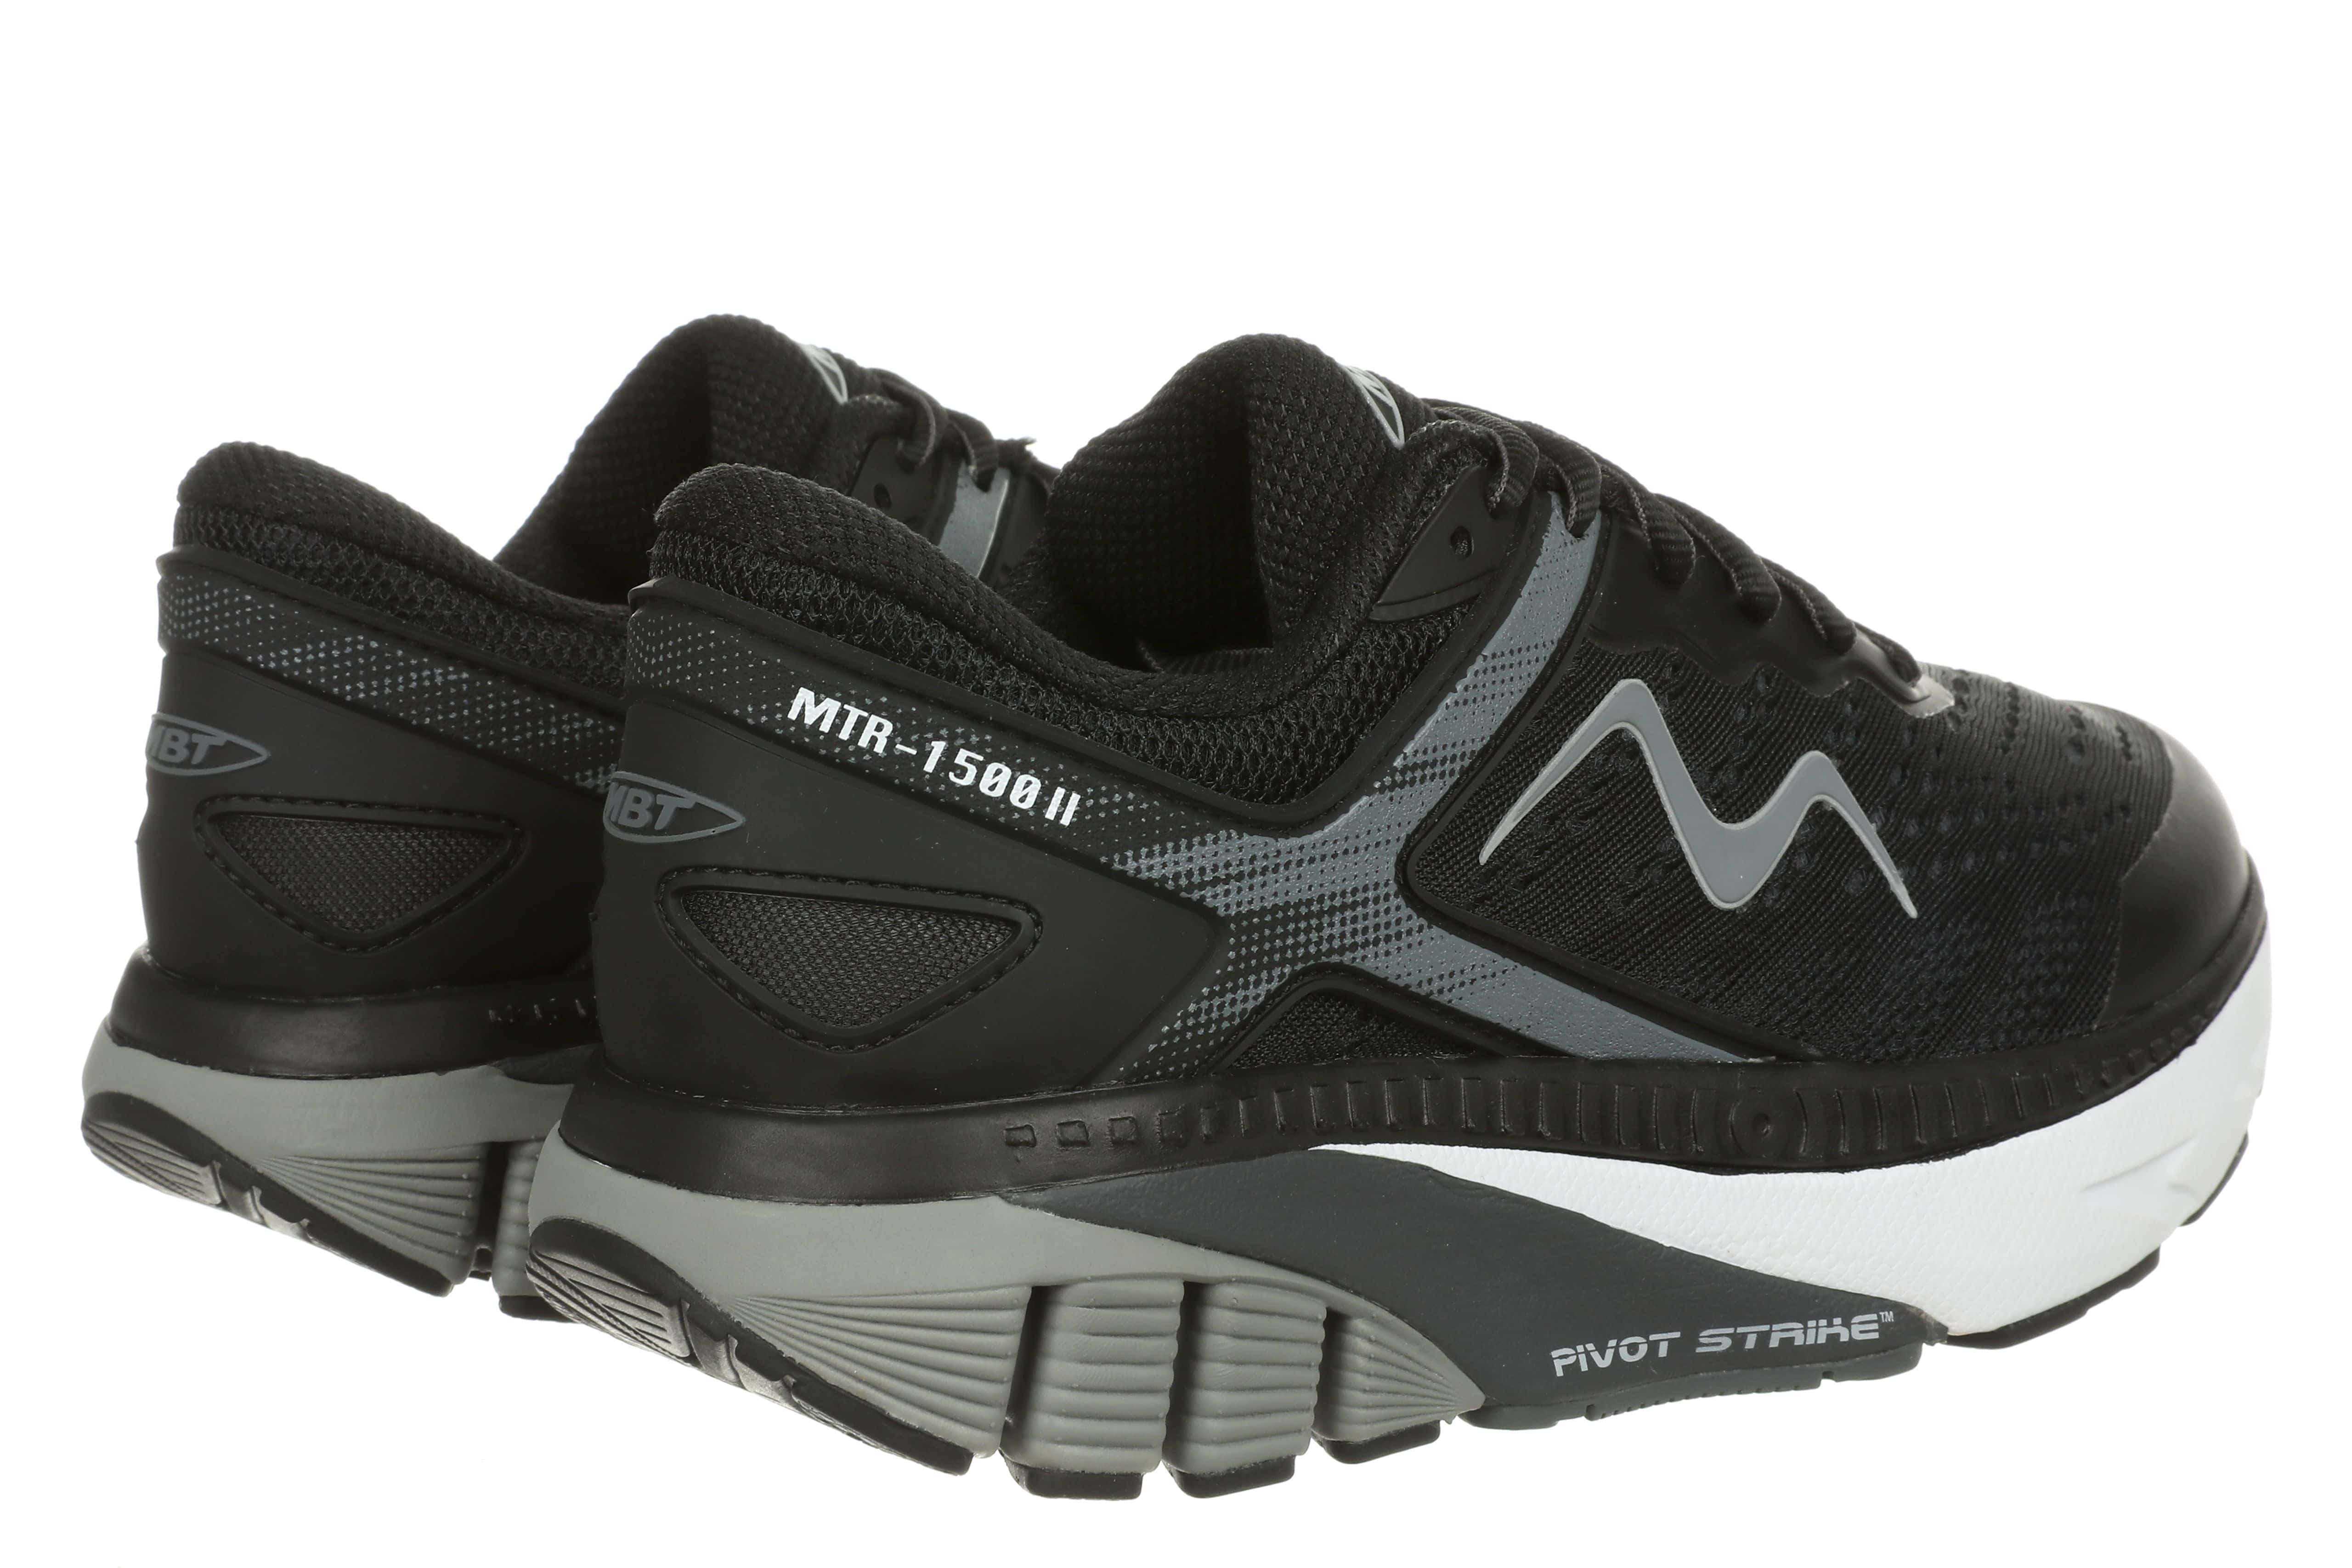 MBT SNEAKERS MAN MTR-1500 II LACE UP